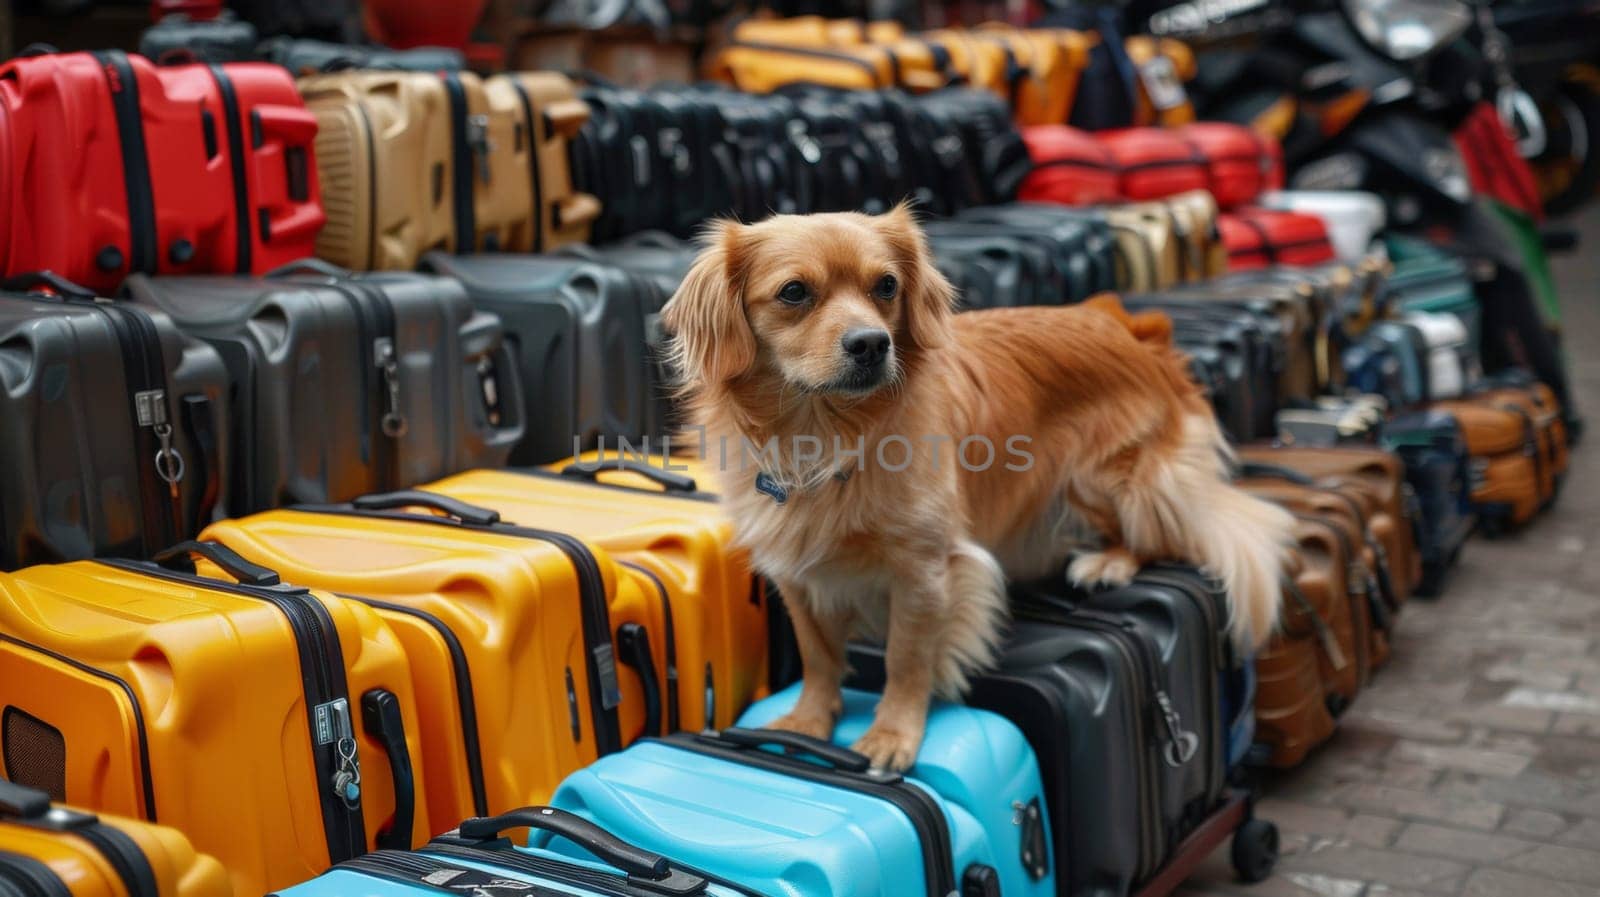 A dog standing on top of a pile of luggage